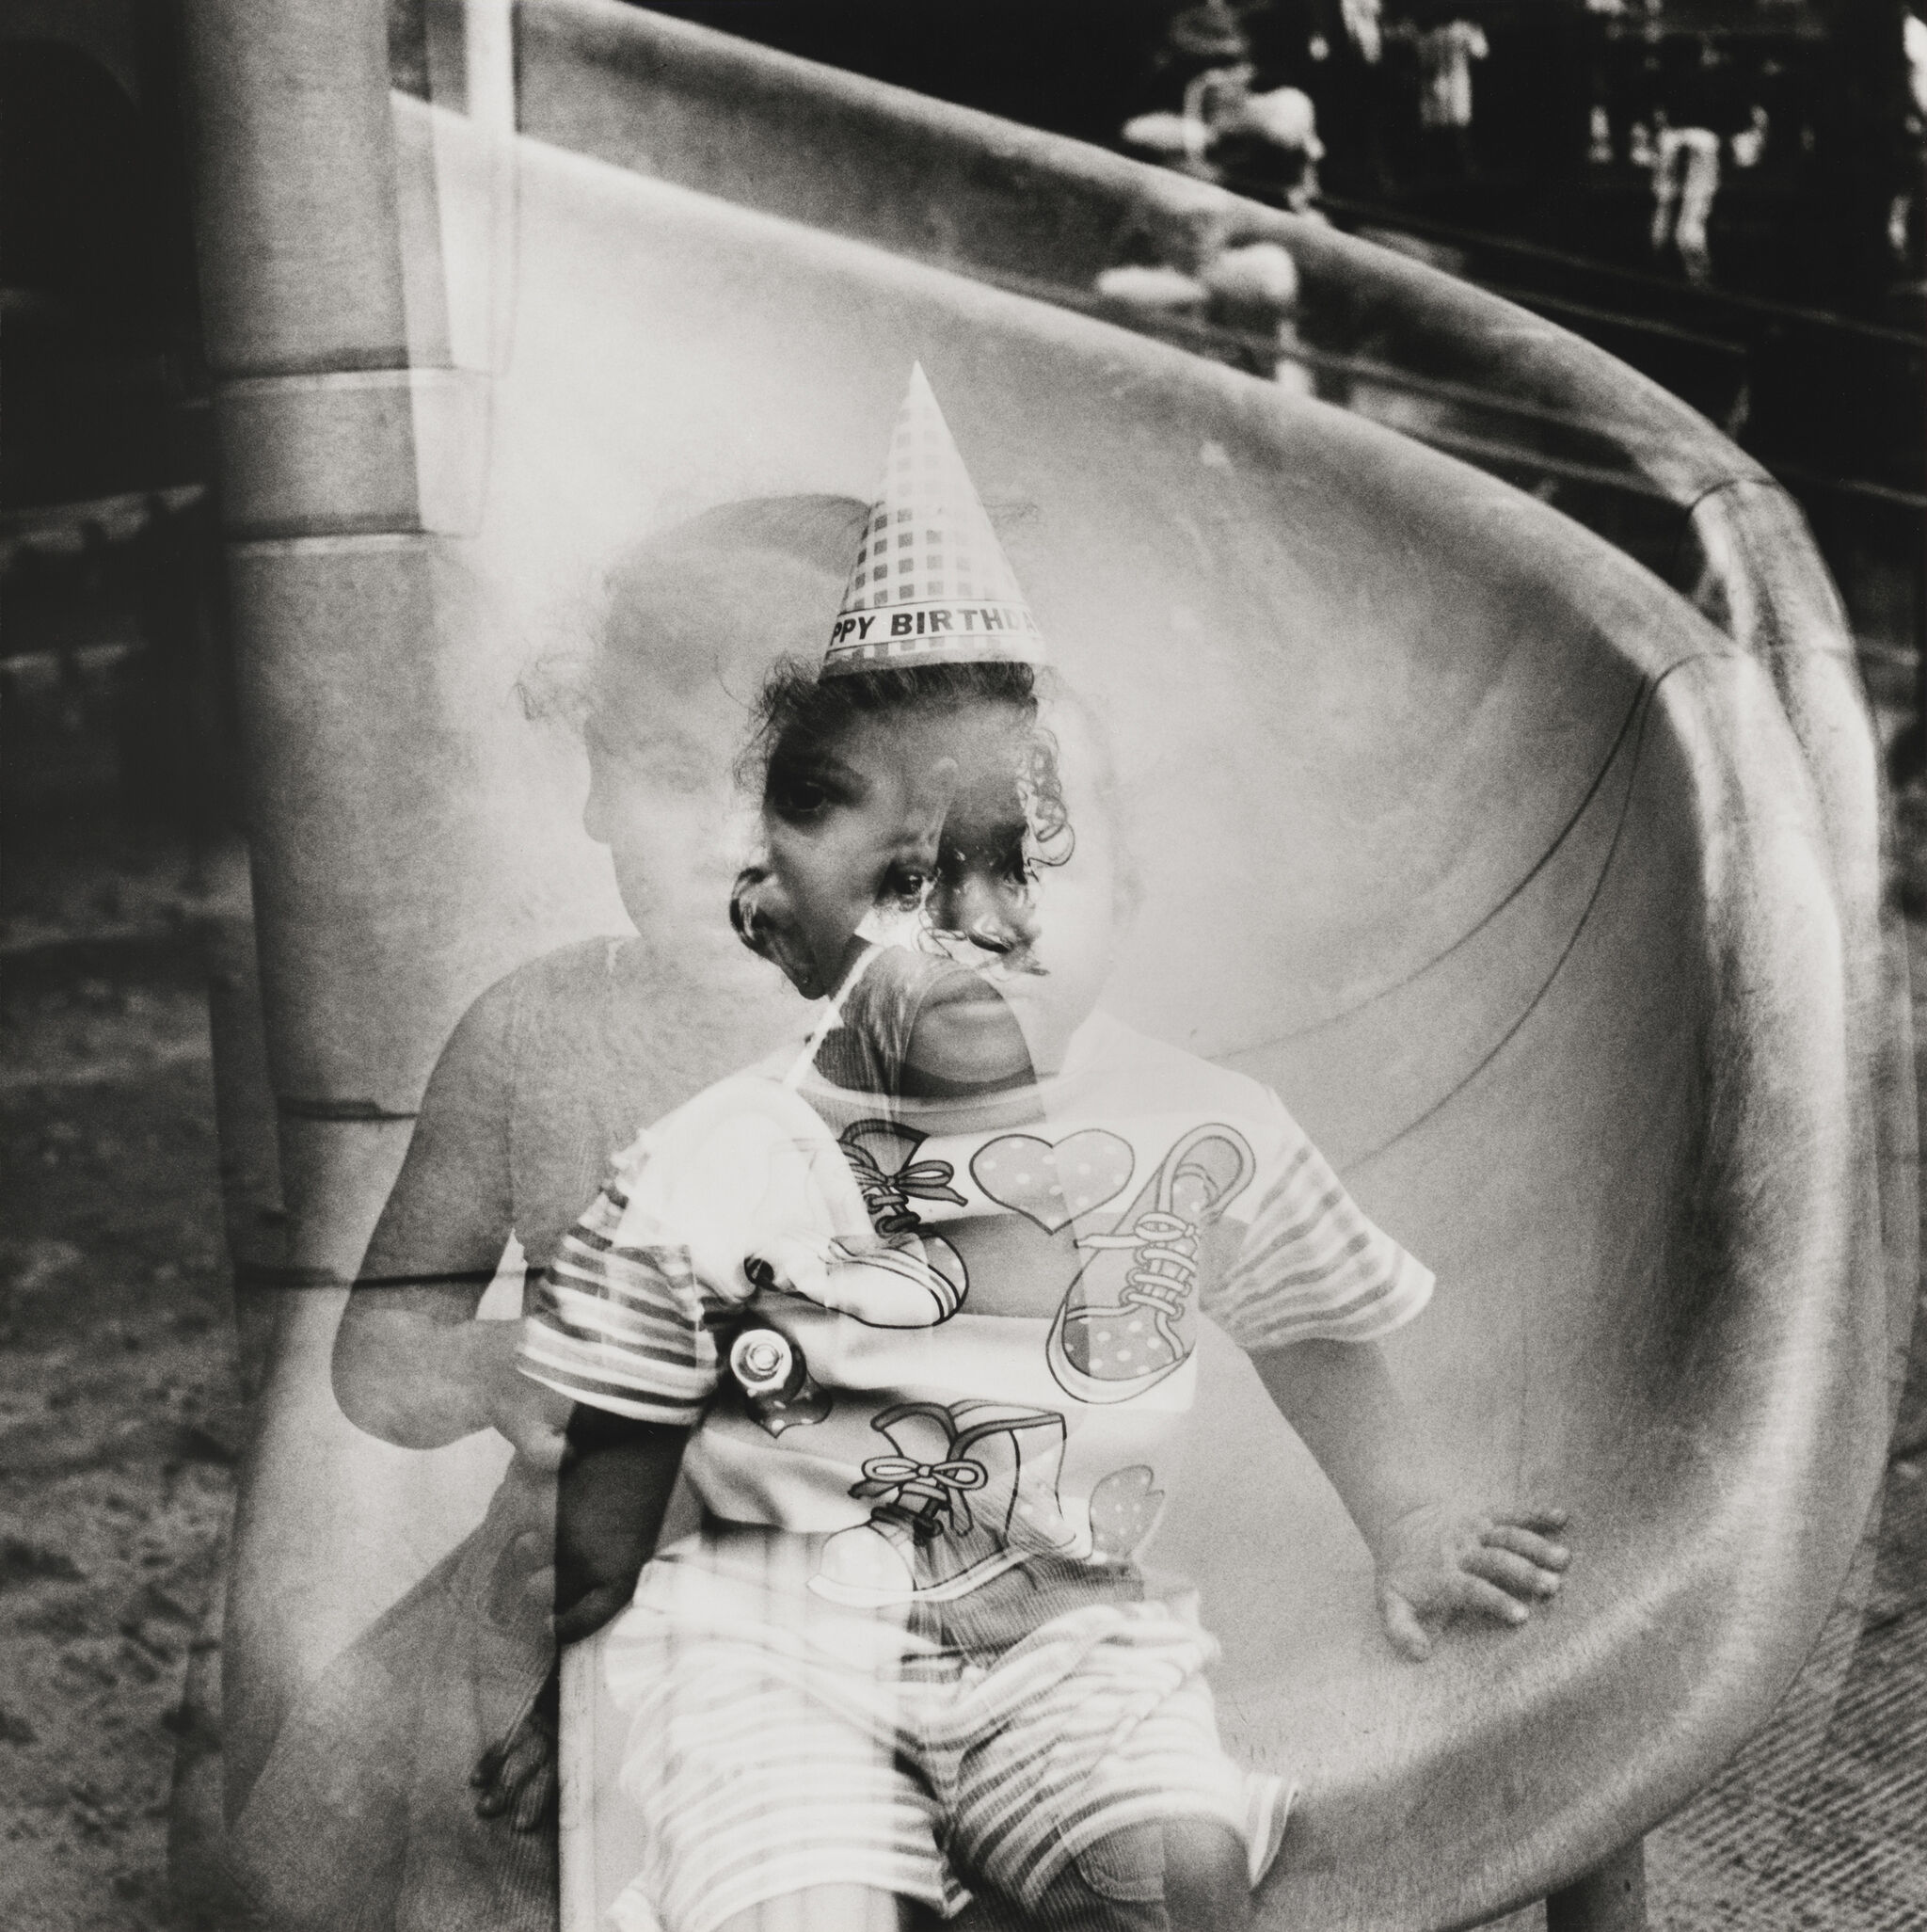 Superimposed black and white film photos of a child.